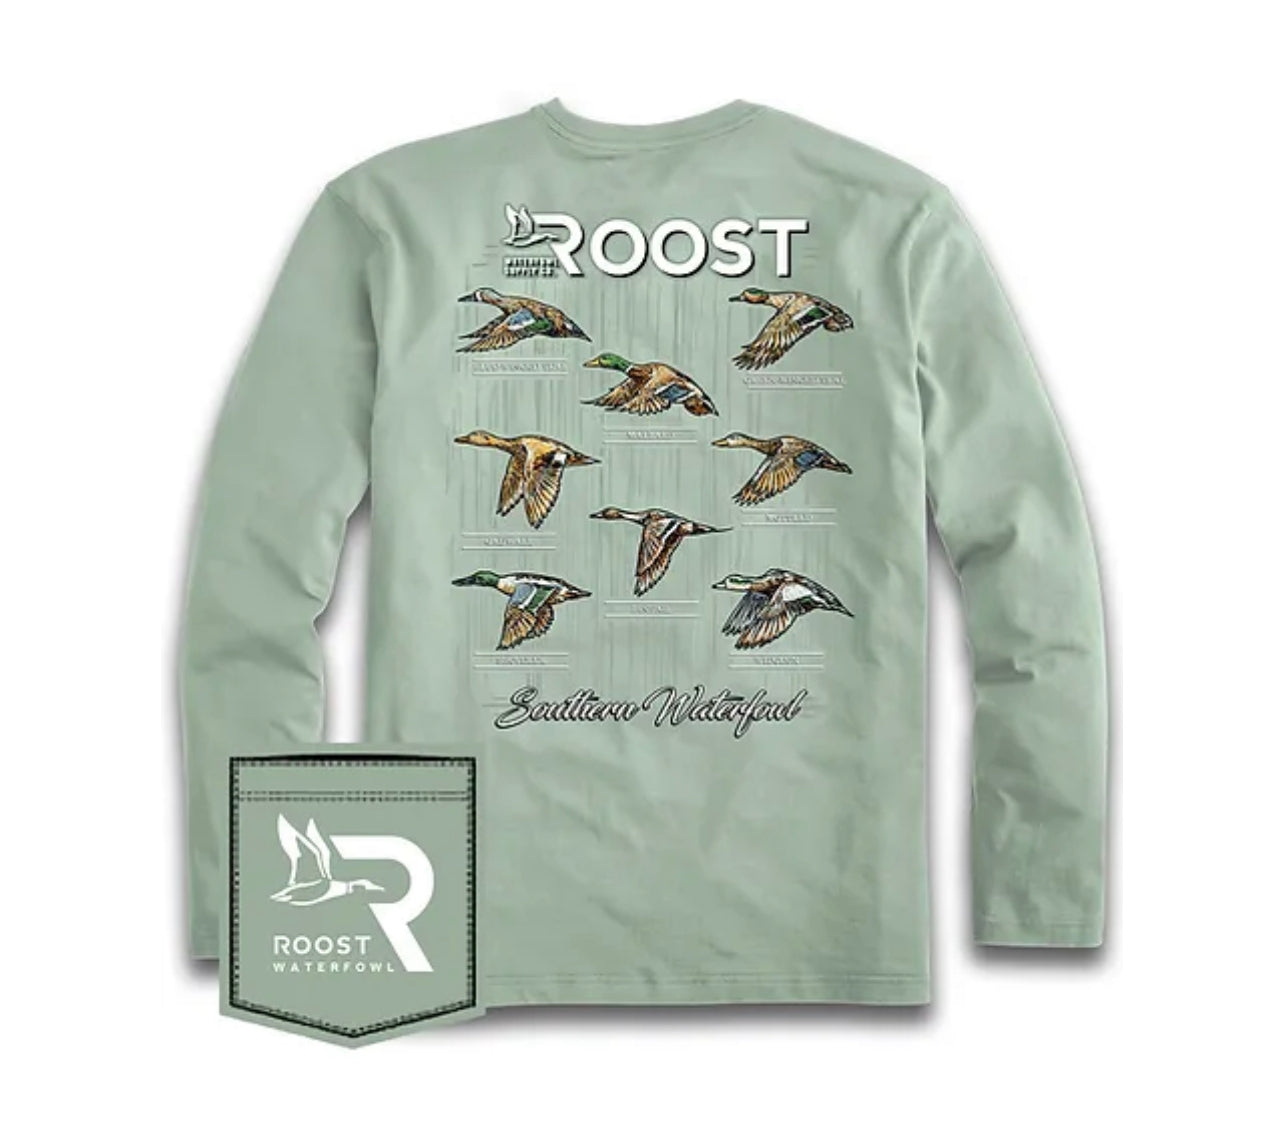 Roost Southern Waterfowl L/S